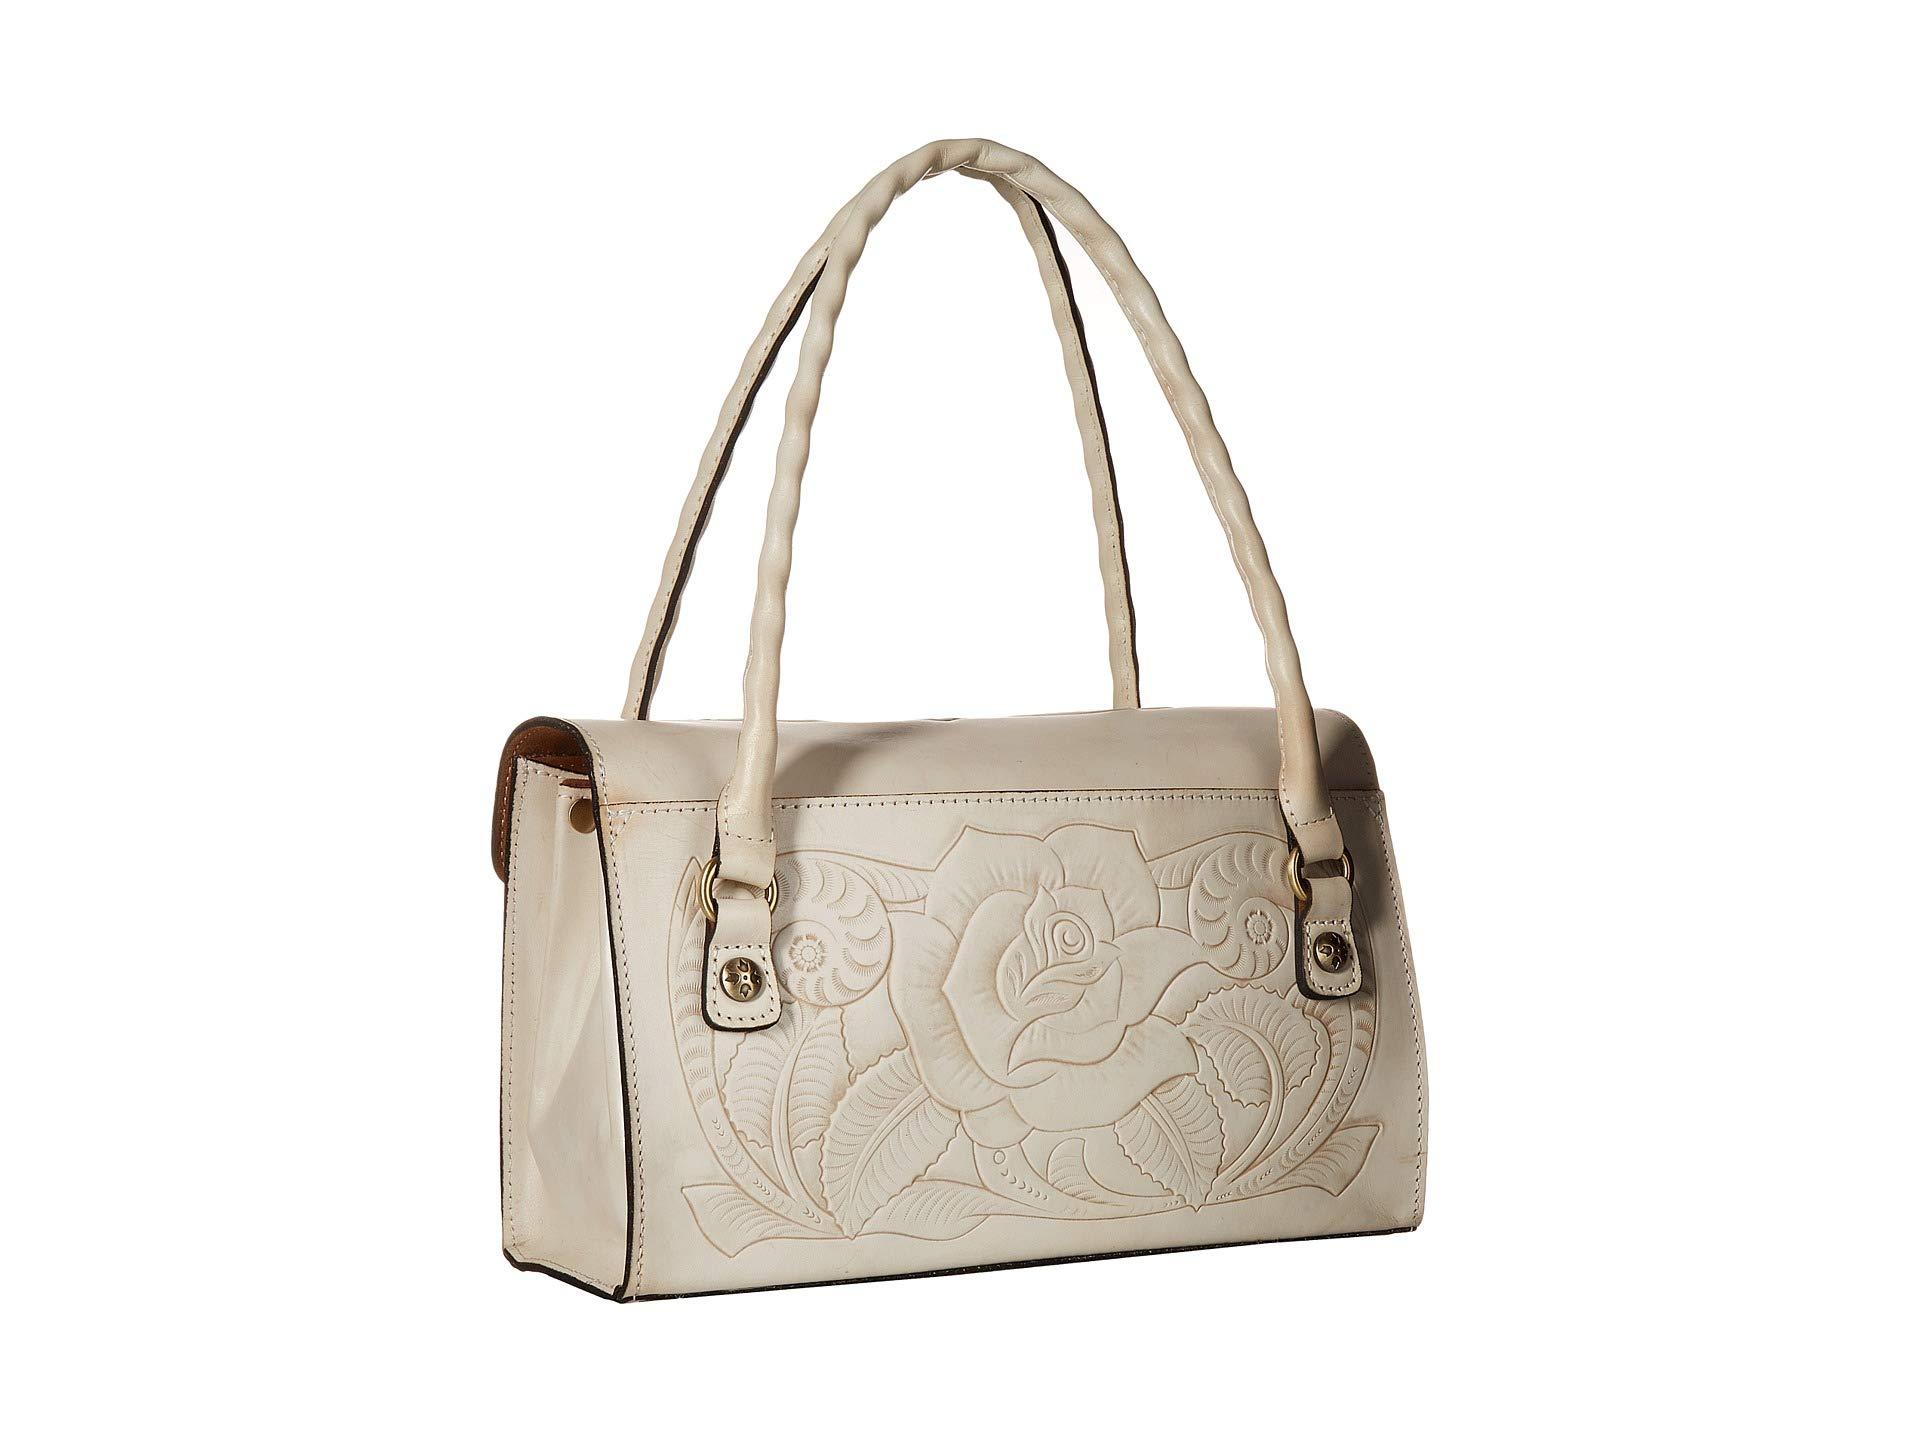 Patricia Nash Leather Waxed Tooled Sanabria Satchel in White - Lyst